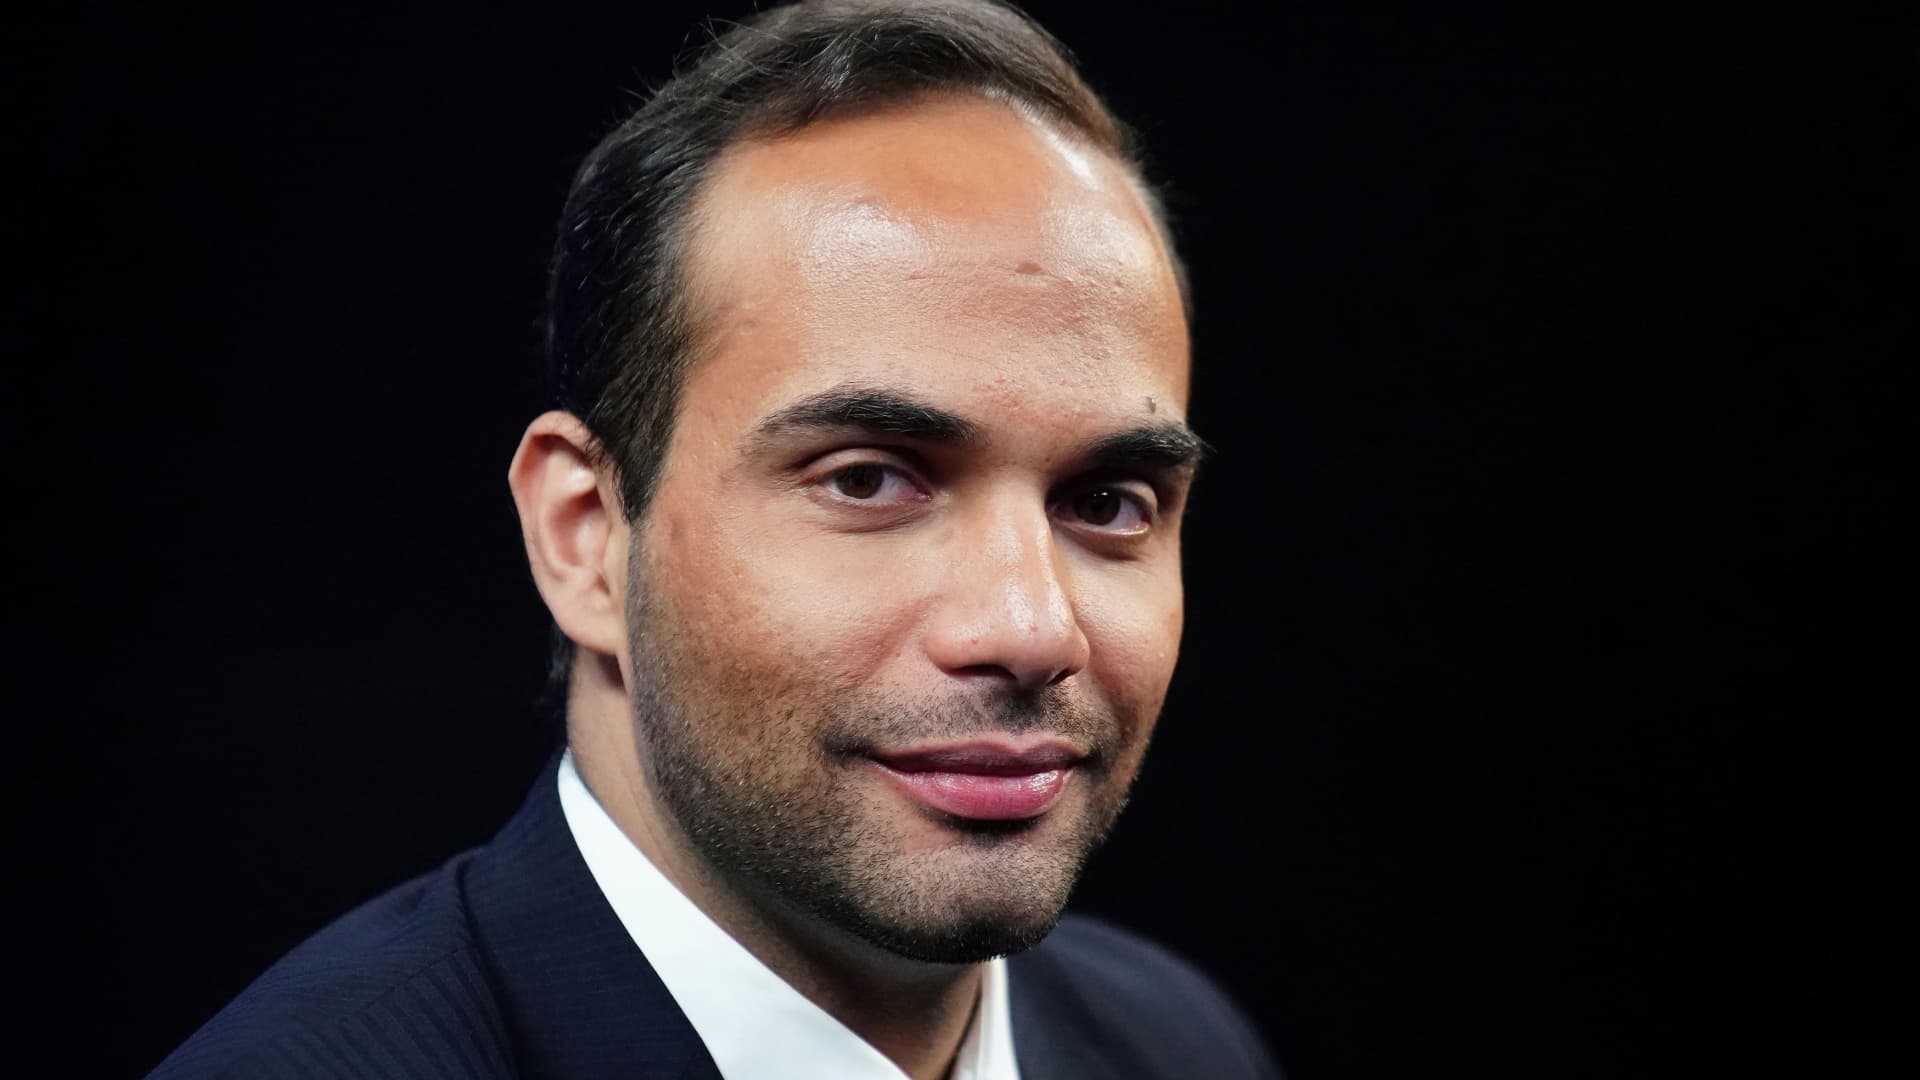 George Papadopoulos, a former member of the foreign policy panel to Donald Trump's 2016 presidential campaign, poses for a photo before a TV interview in New York, New York, U.S., March 26, 2019.